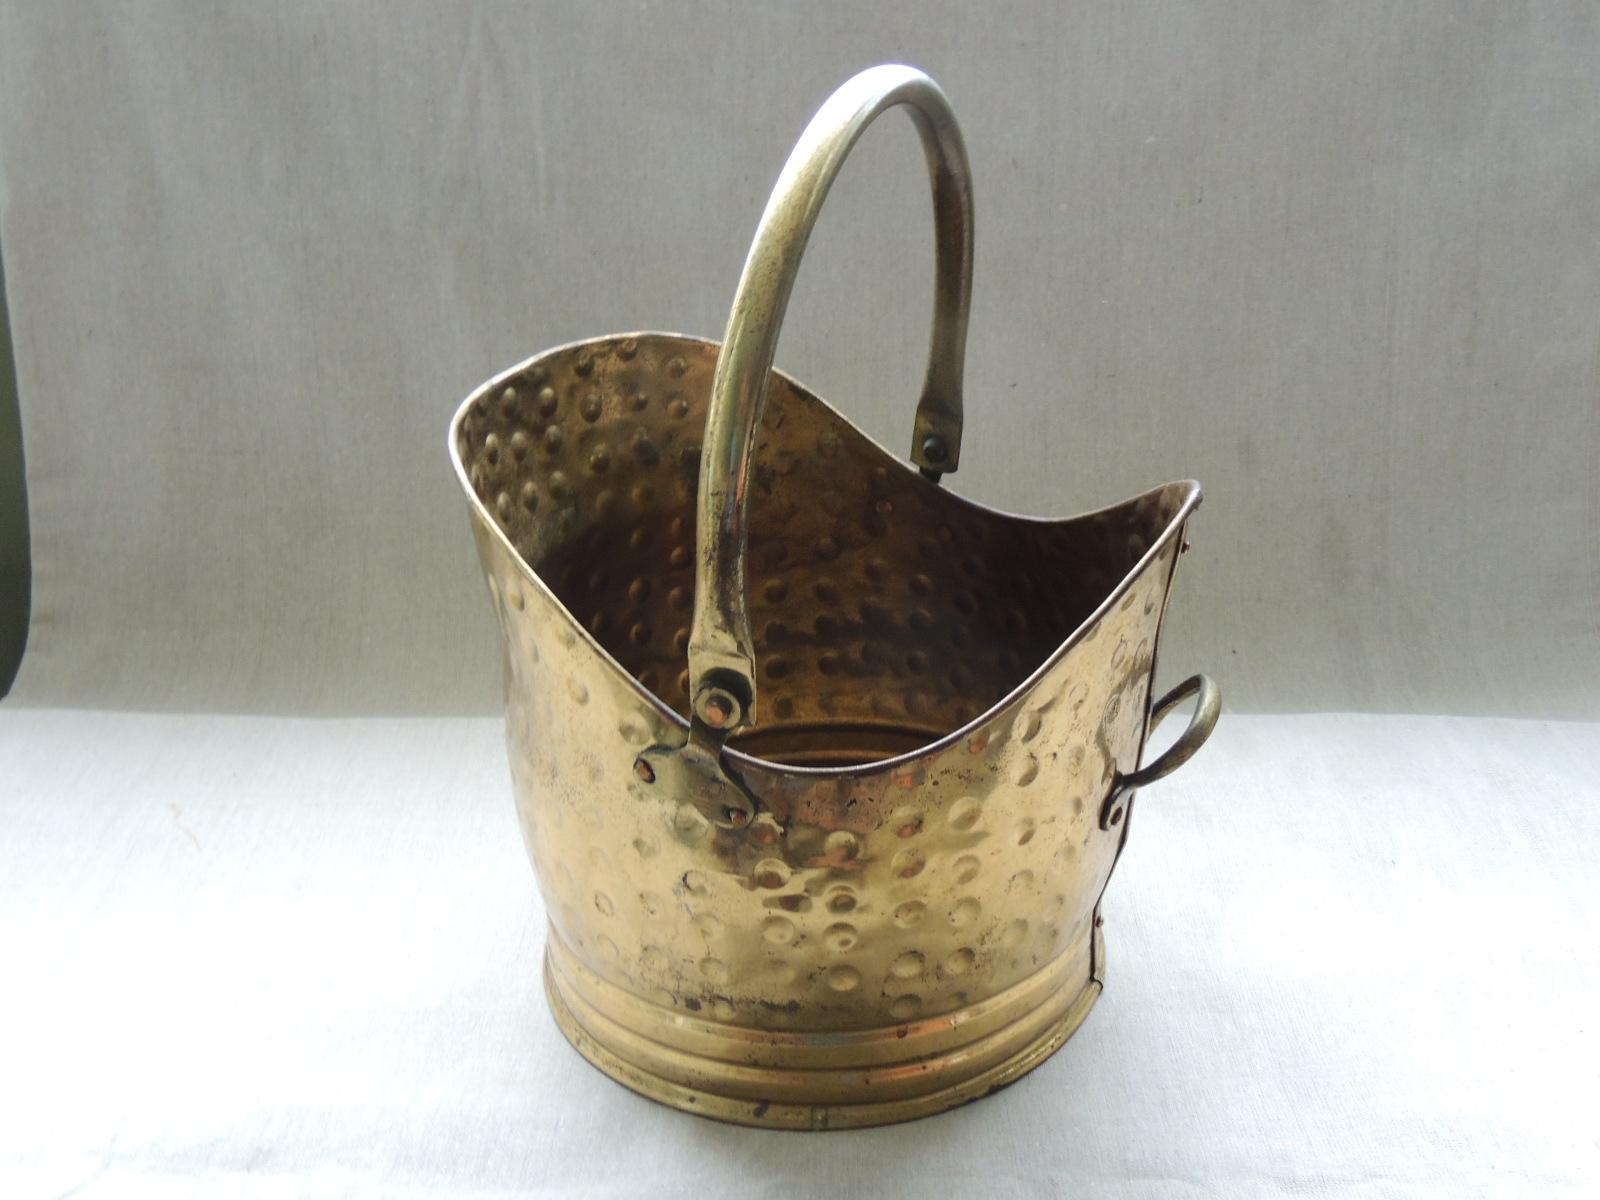 Vintage hand-hammered polish brass cauldron with handle
Round wood or log holder.
Can also be use as a wastebasket or planter.
Size: 11